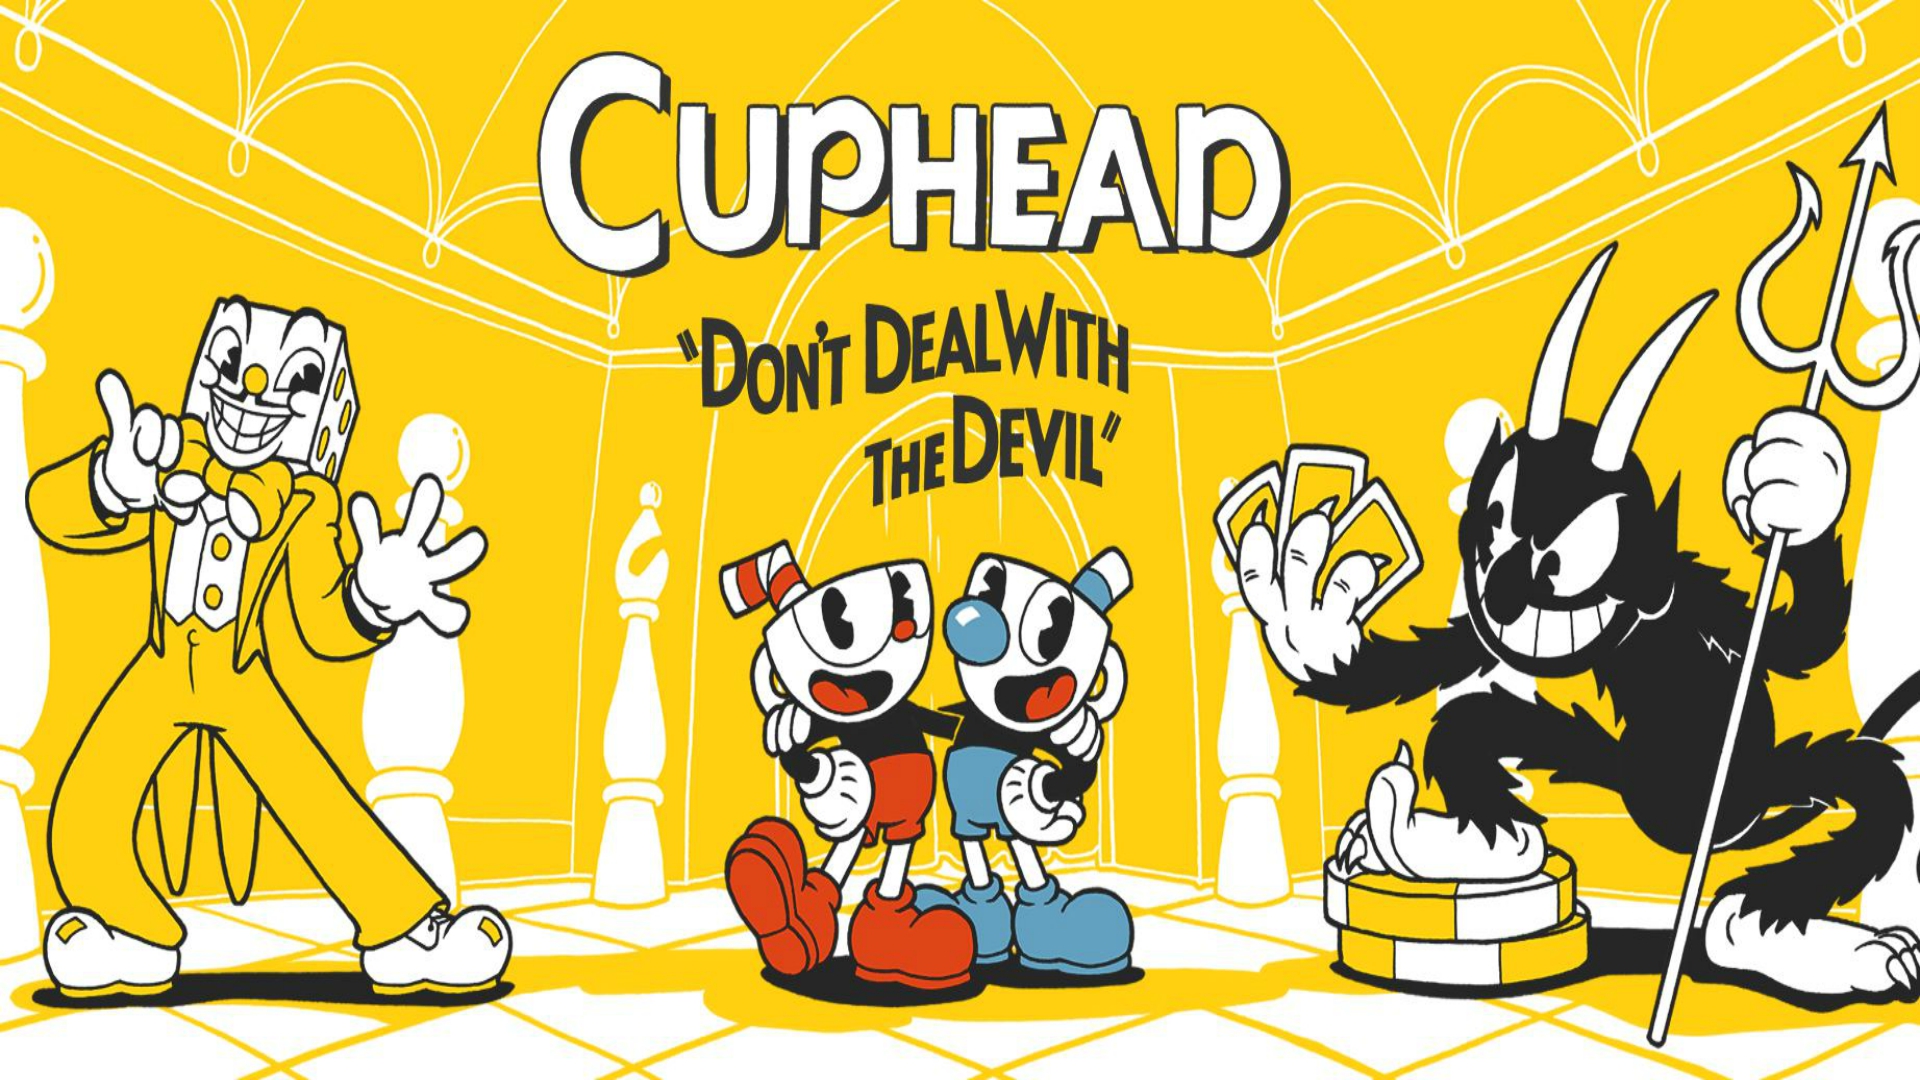 Cuphead full game free download pc